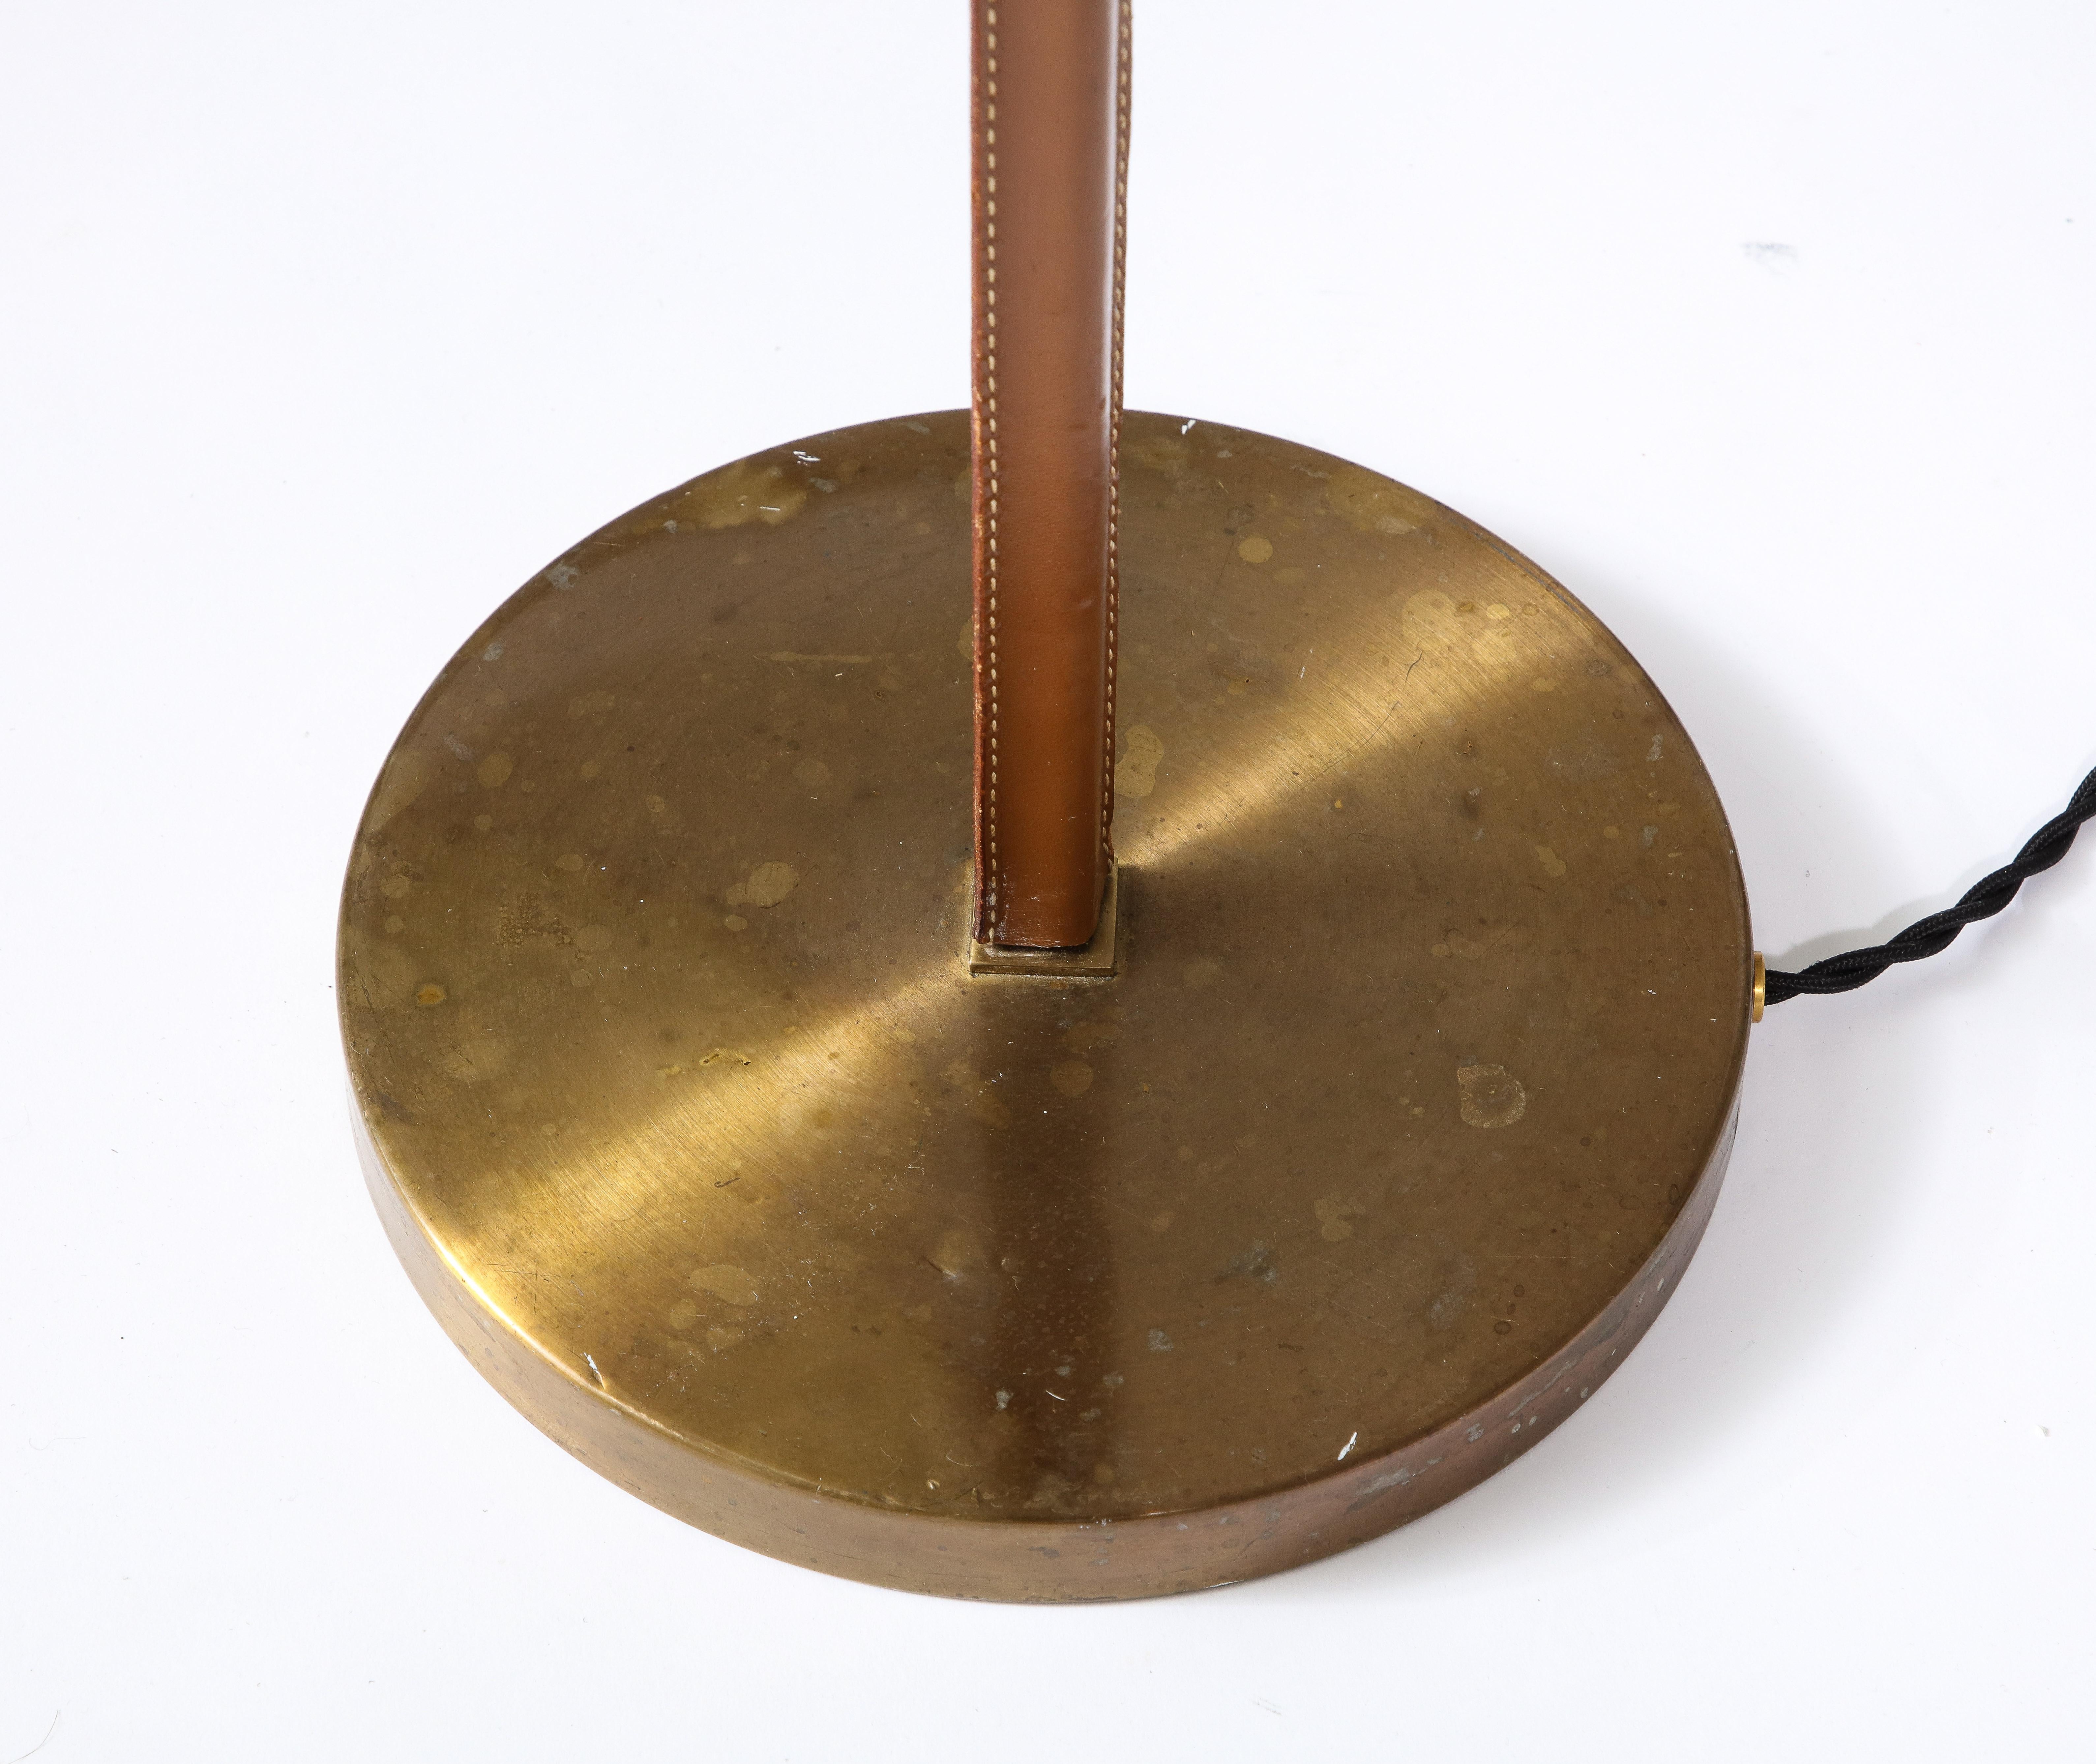 Brass and Leather Floor Lamp by Falkenbergs Belysning, Sweden, c. 1950 For Sale 9